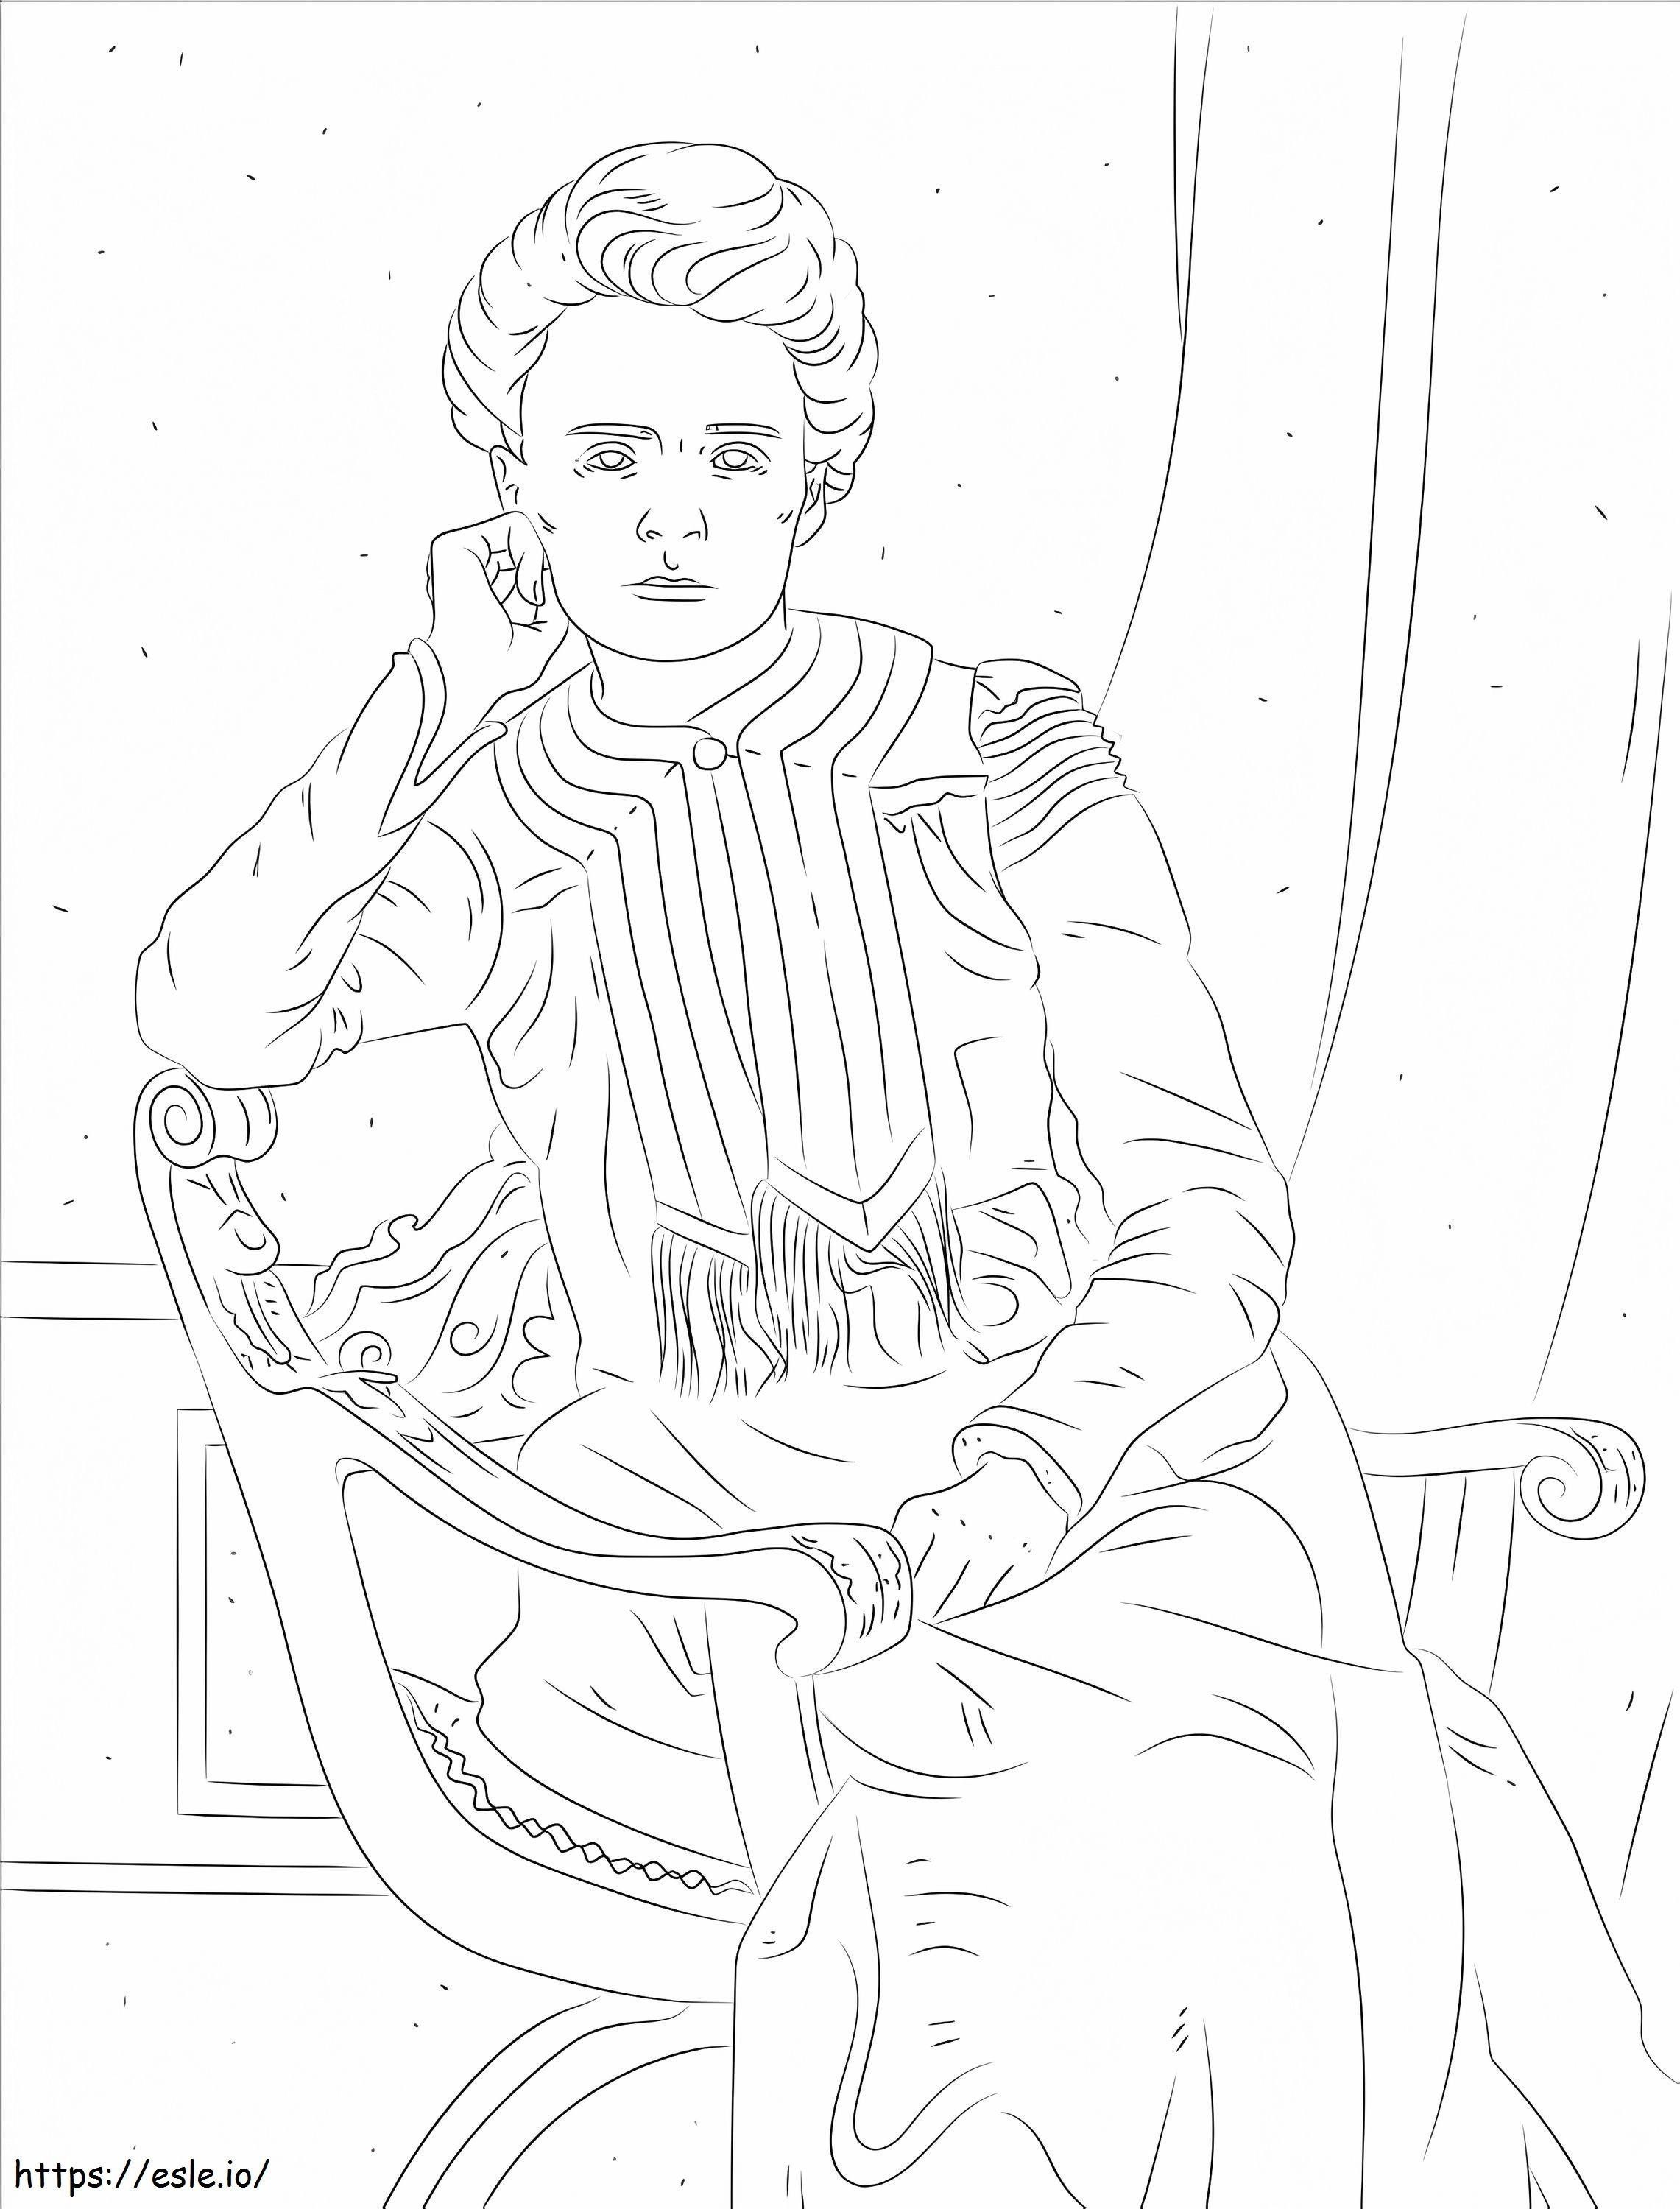 Young Marie Curie coloring page